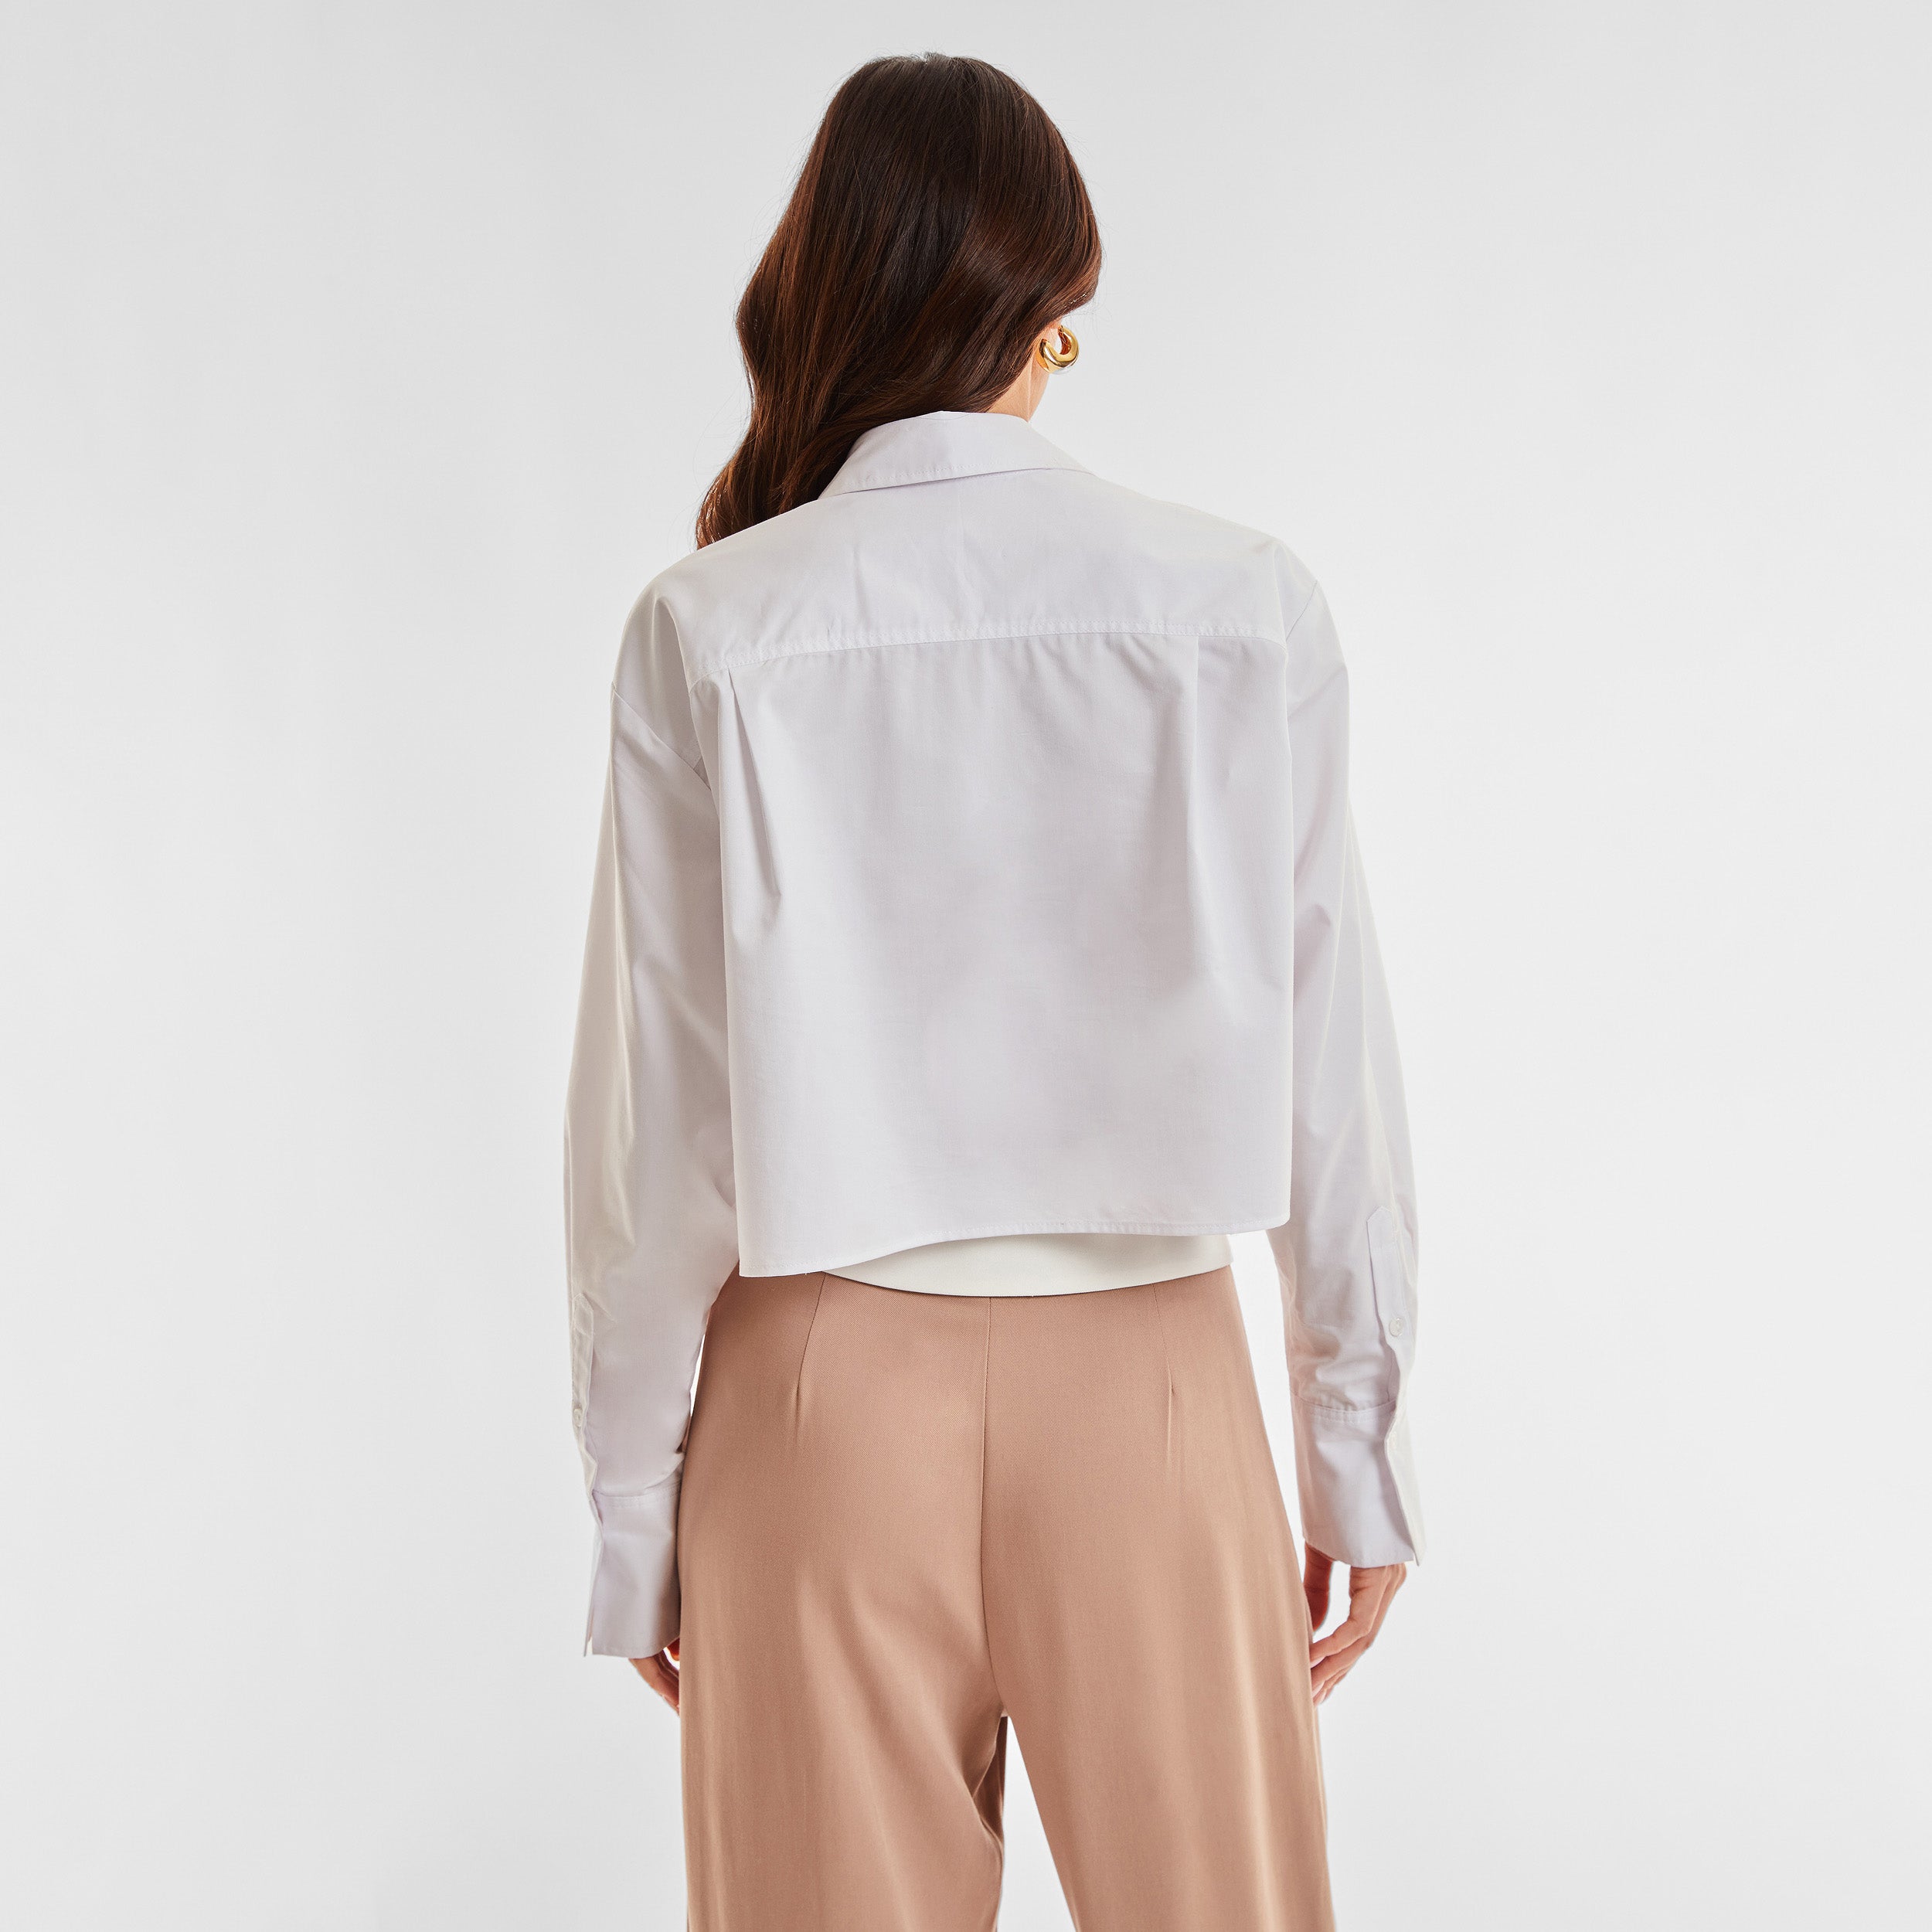 Rear view of woman wearing a cropped white buttonup shirt and foldover waist mocha colored pant